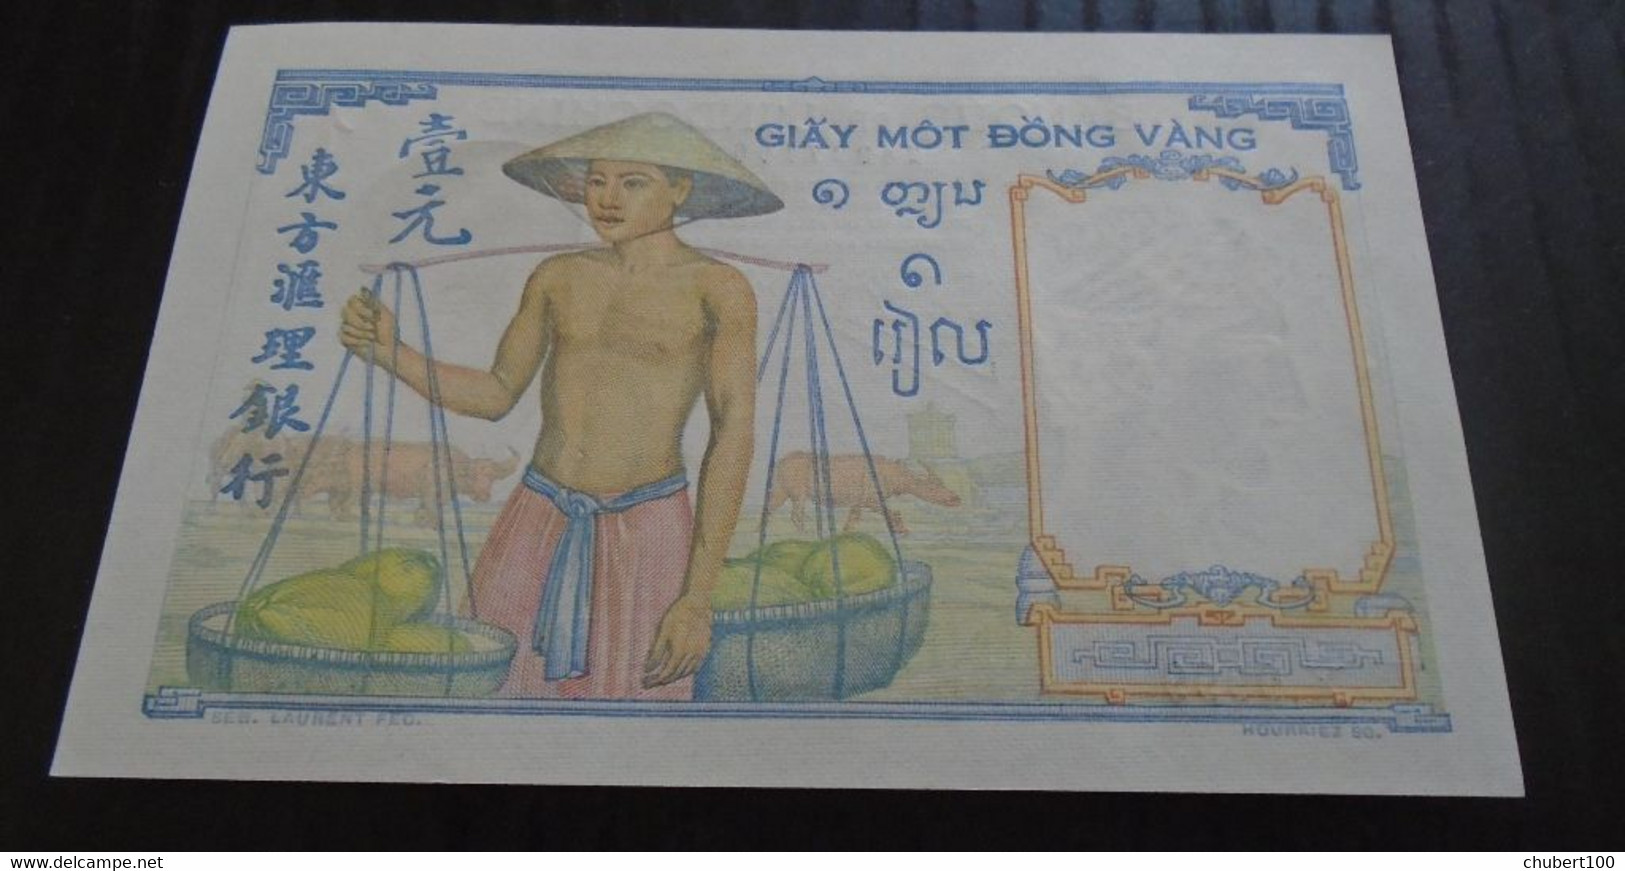 FRENCH INDOCHINA , P 54e , 1 Piastre , ND 1949, UNC Neuf , Solid Lucky Numbers: 9999 777 - Indochine